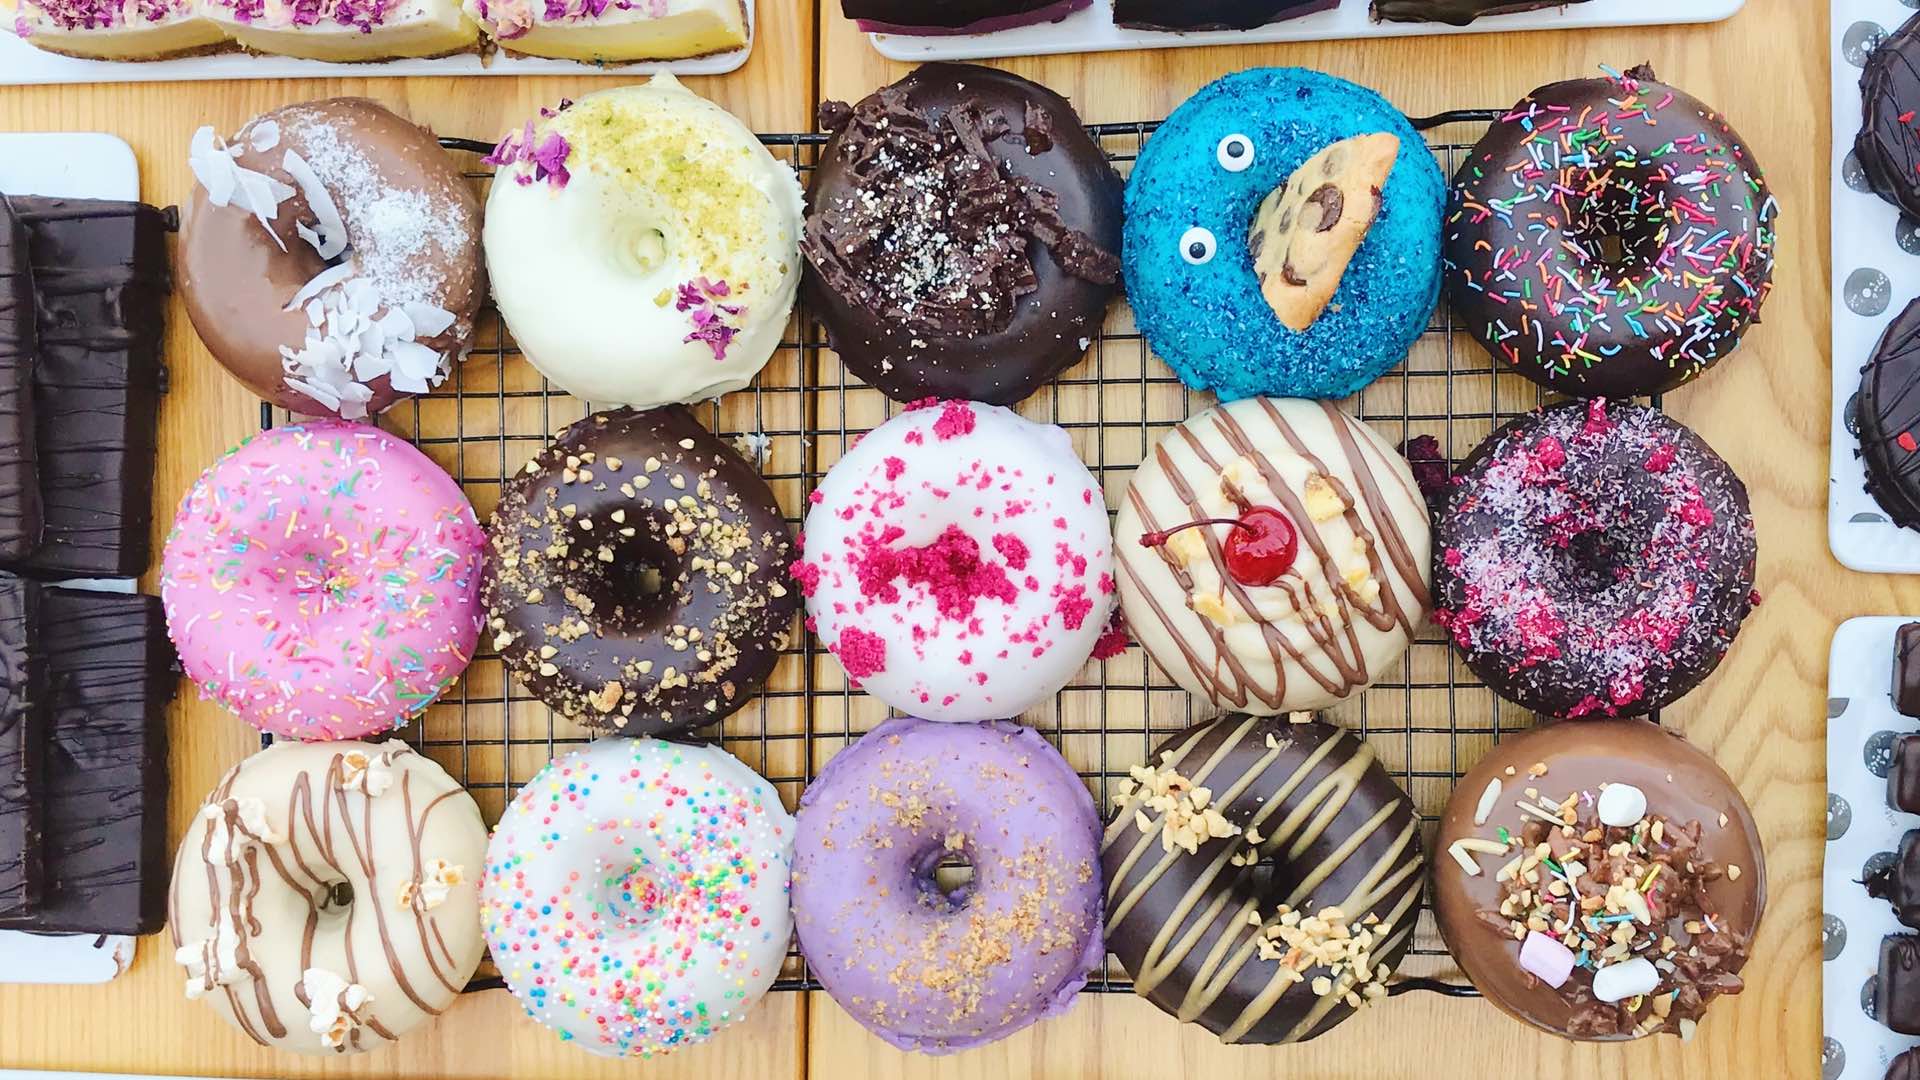 Nutie Is Bringing Its Gluten-Free (and Mostly Vegan) Doughnuts to Sydney's CBD